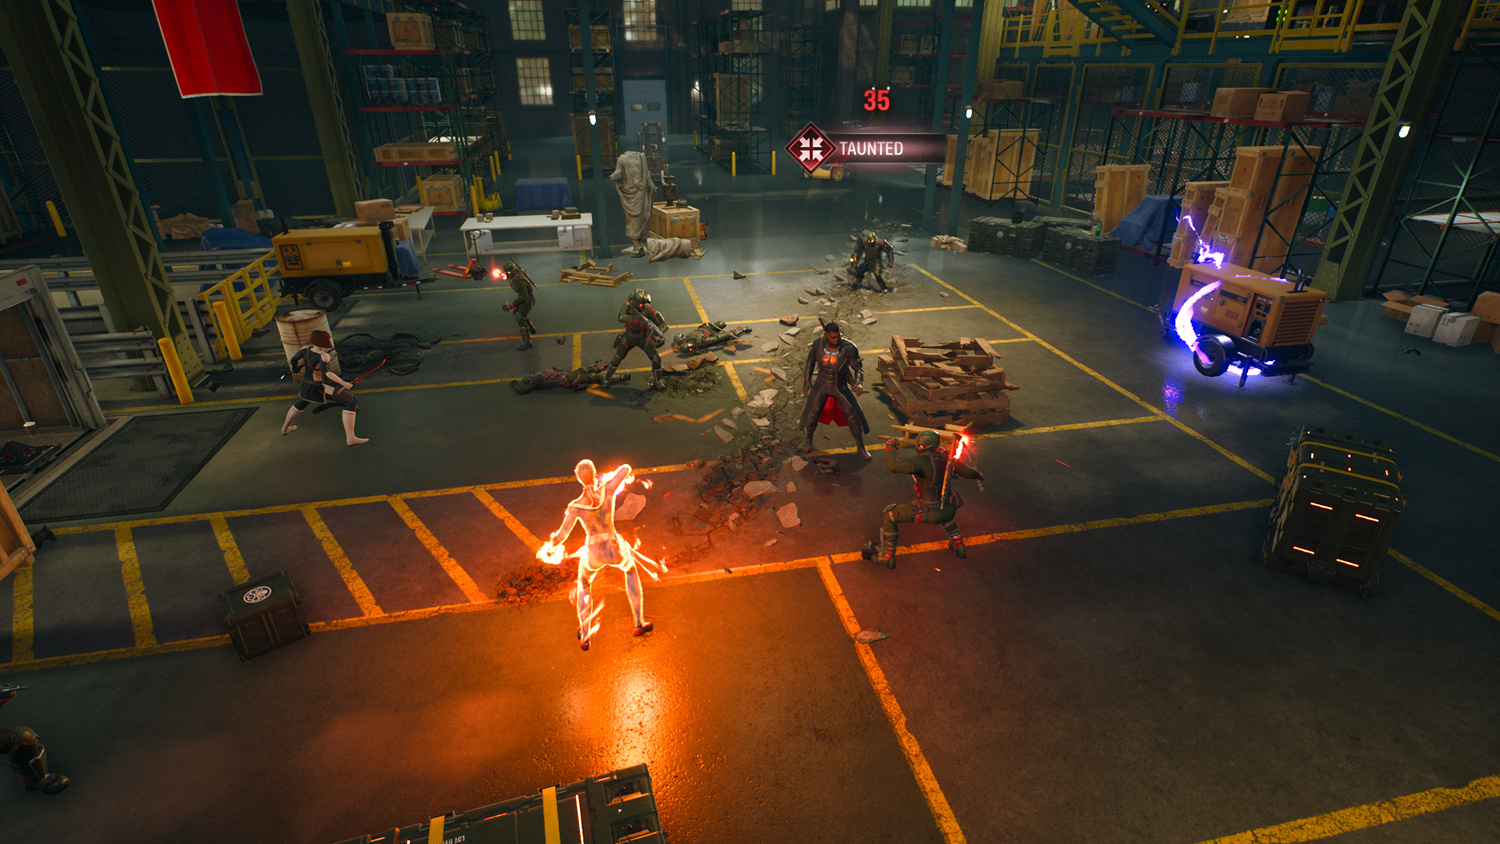 Here's Marvel's Midnight Suns gameplay in action